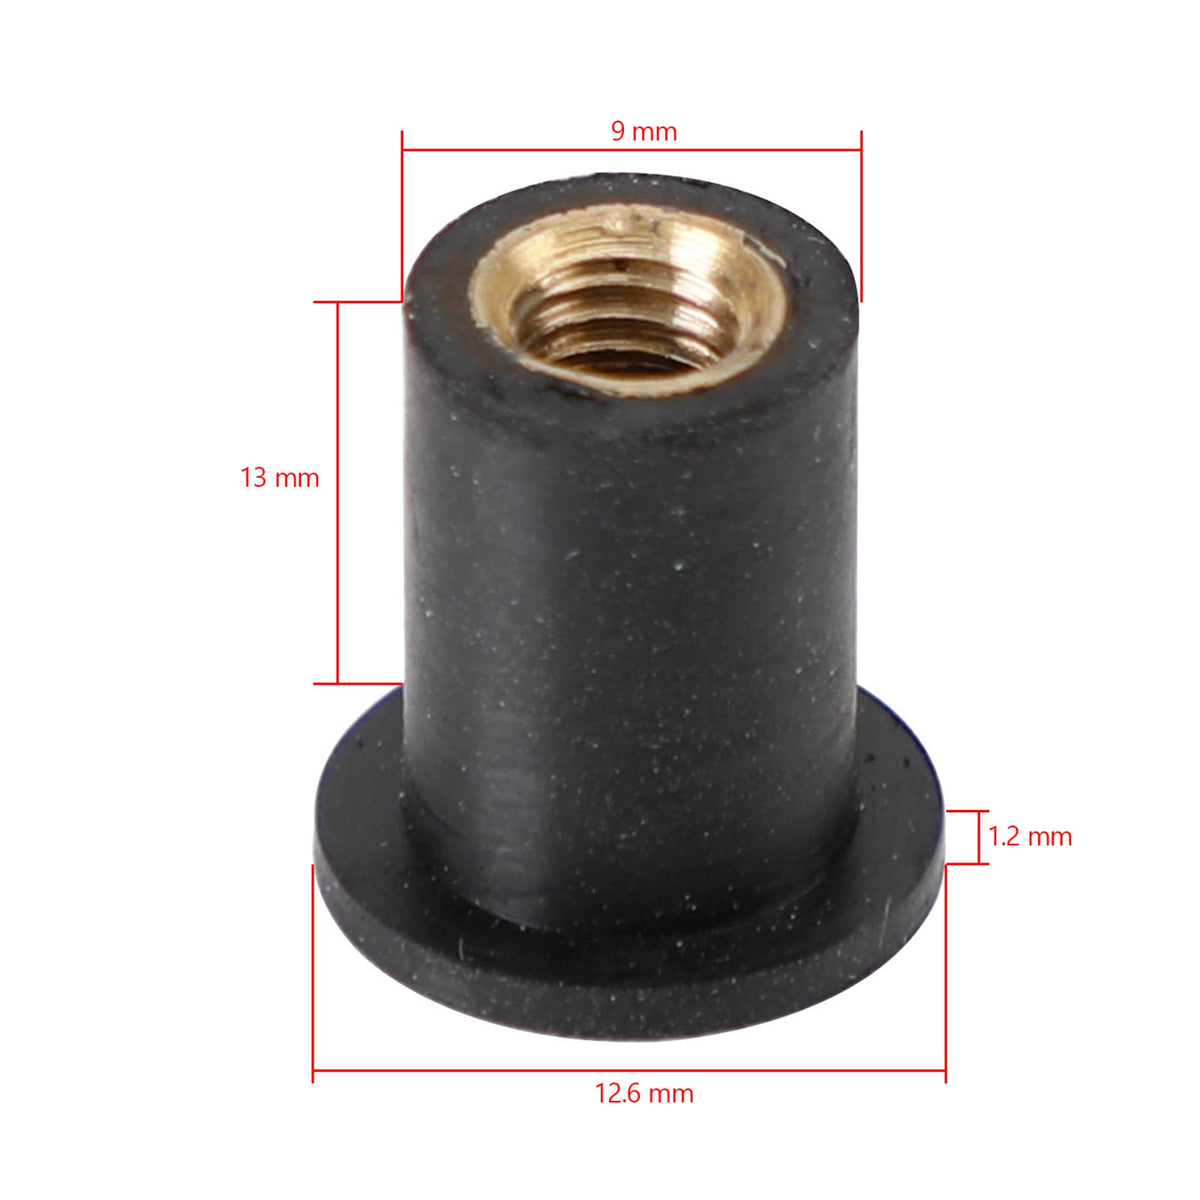 M5 Rubber Well Nuts Wellnuts for Fairing & Screen Fixing Pack of 50 - 10mm Hole